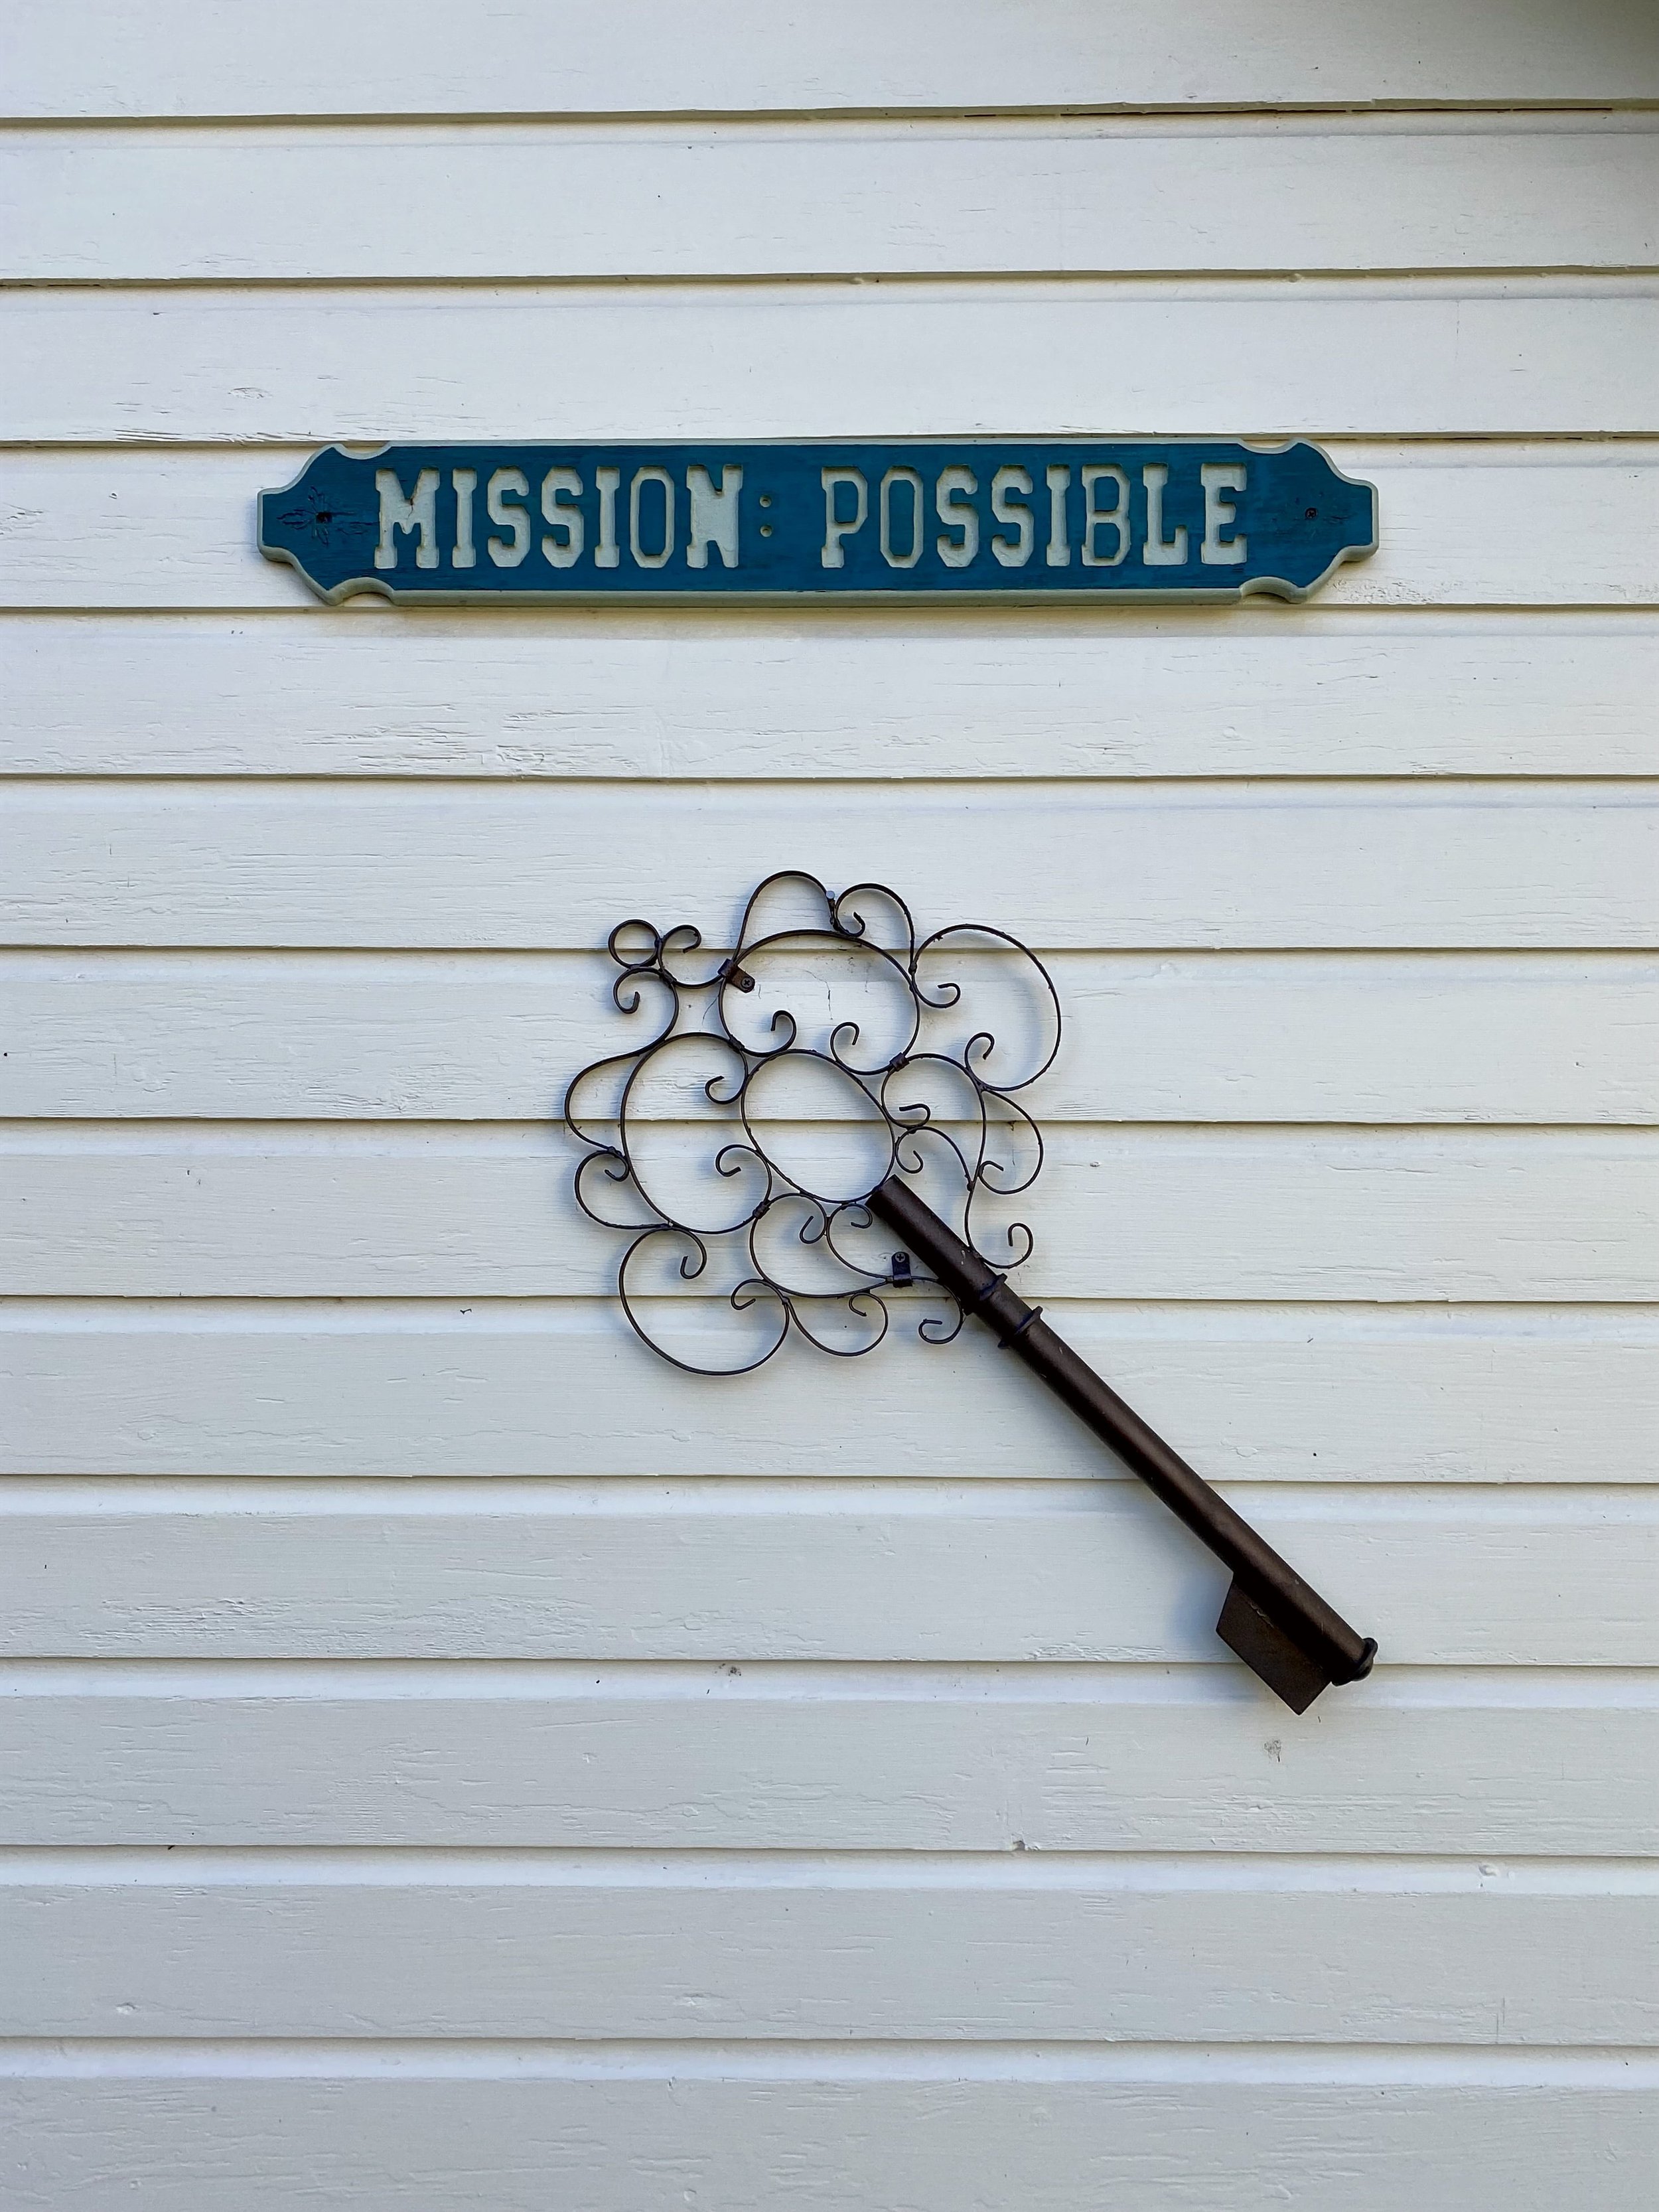 Key_Mission Possible Airbnb_NarrowsburgNY.JPG